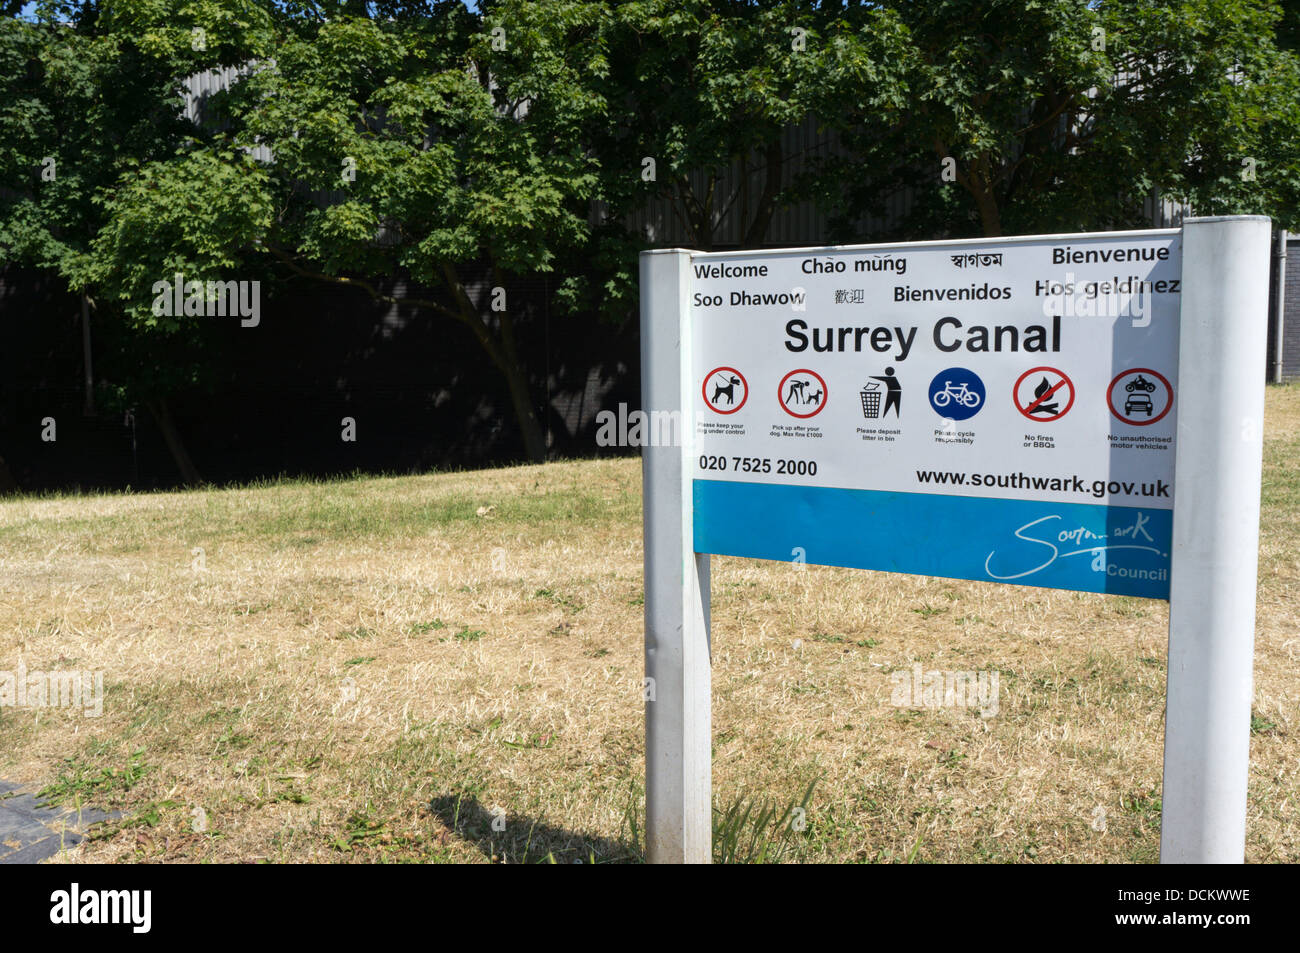 A multilingual sign for the Surrey Canal Linear Park at Peckham in south London. Stock Photo